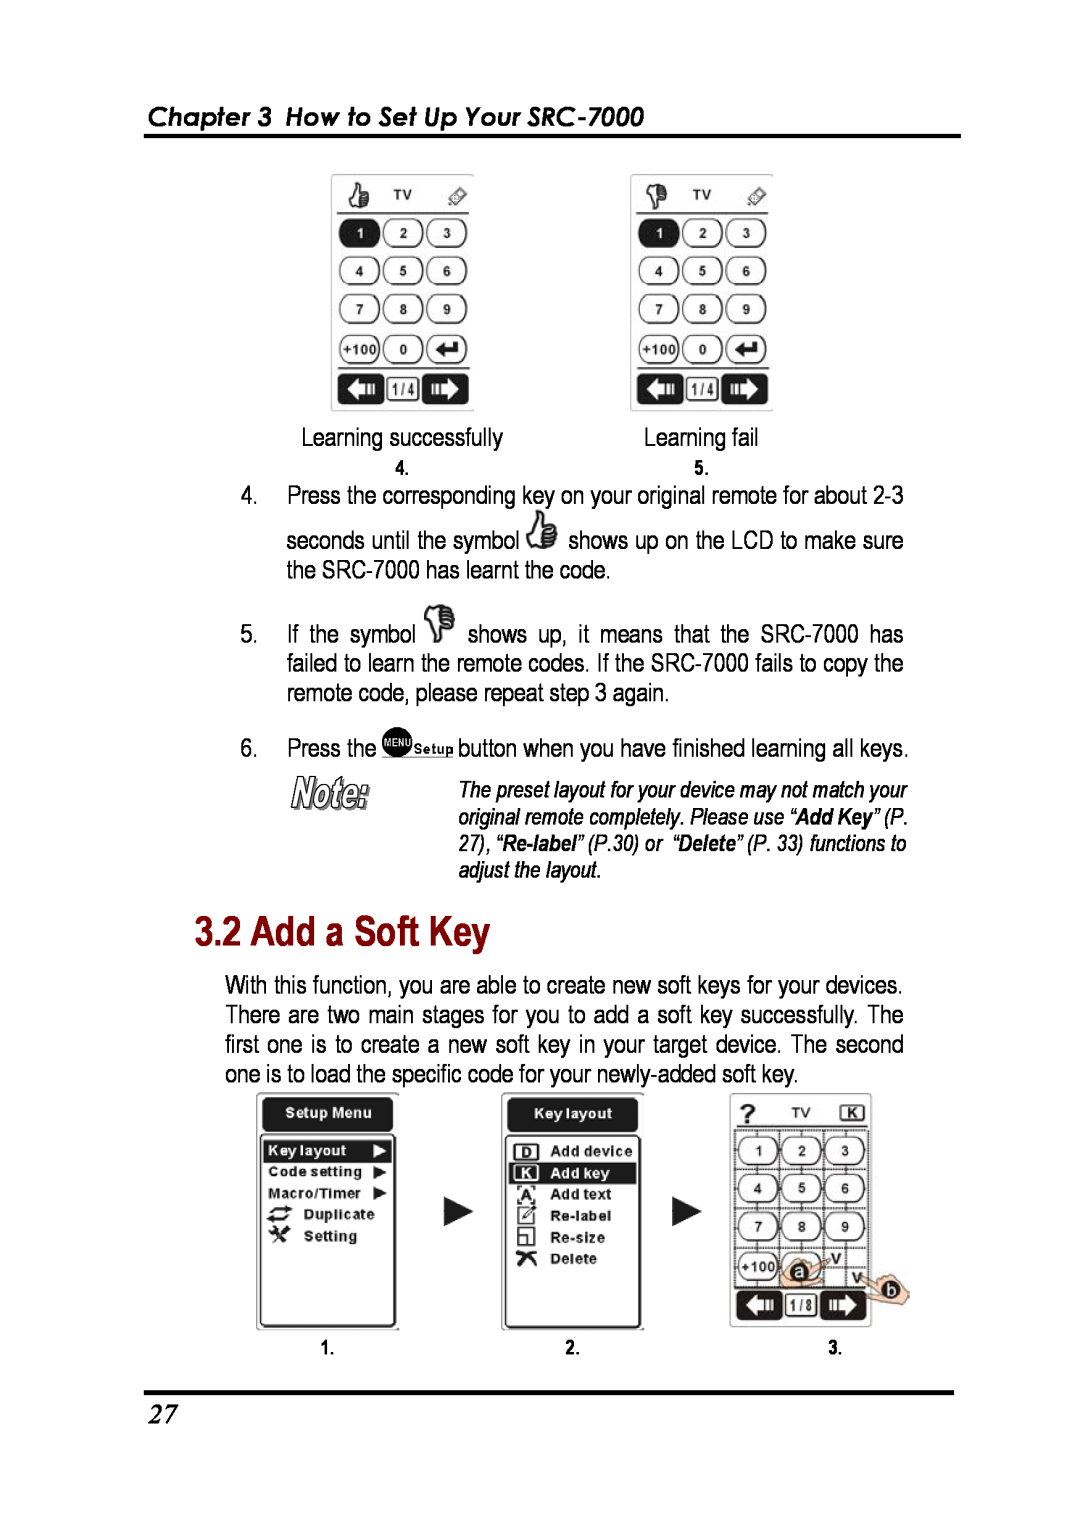 Sunwave Tech manual Add a Soft Key, How to Set Up Your SRC-7000 